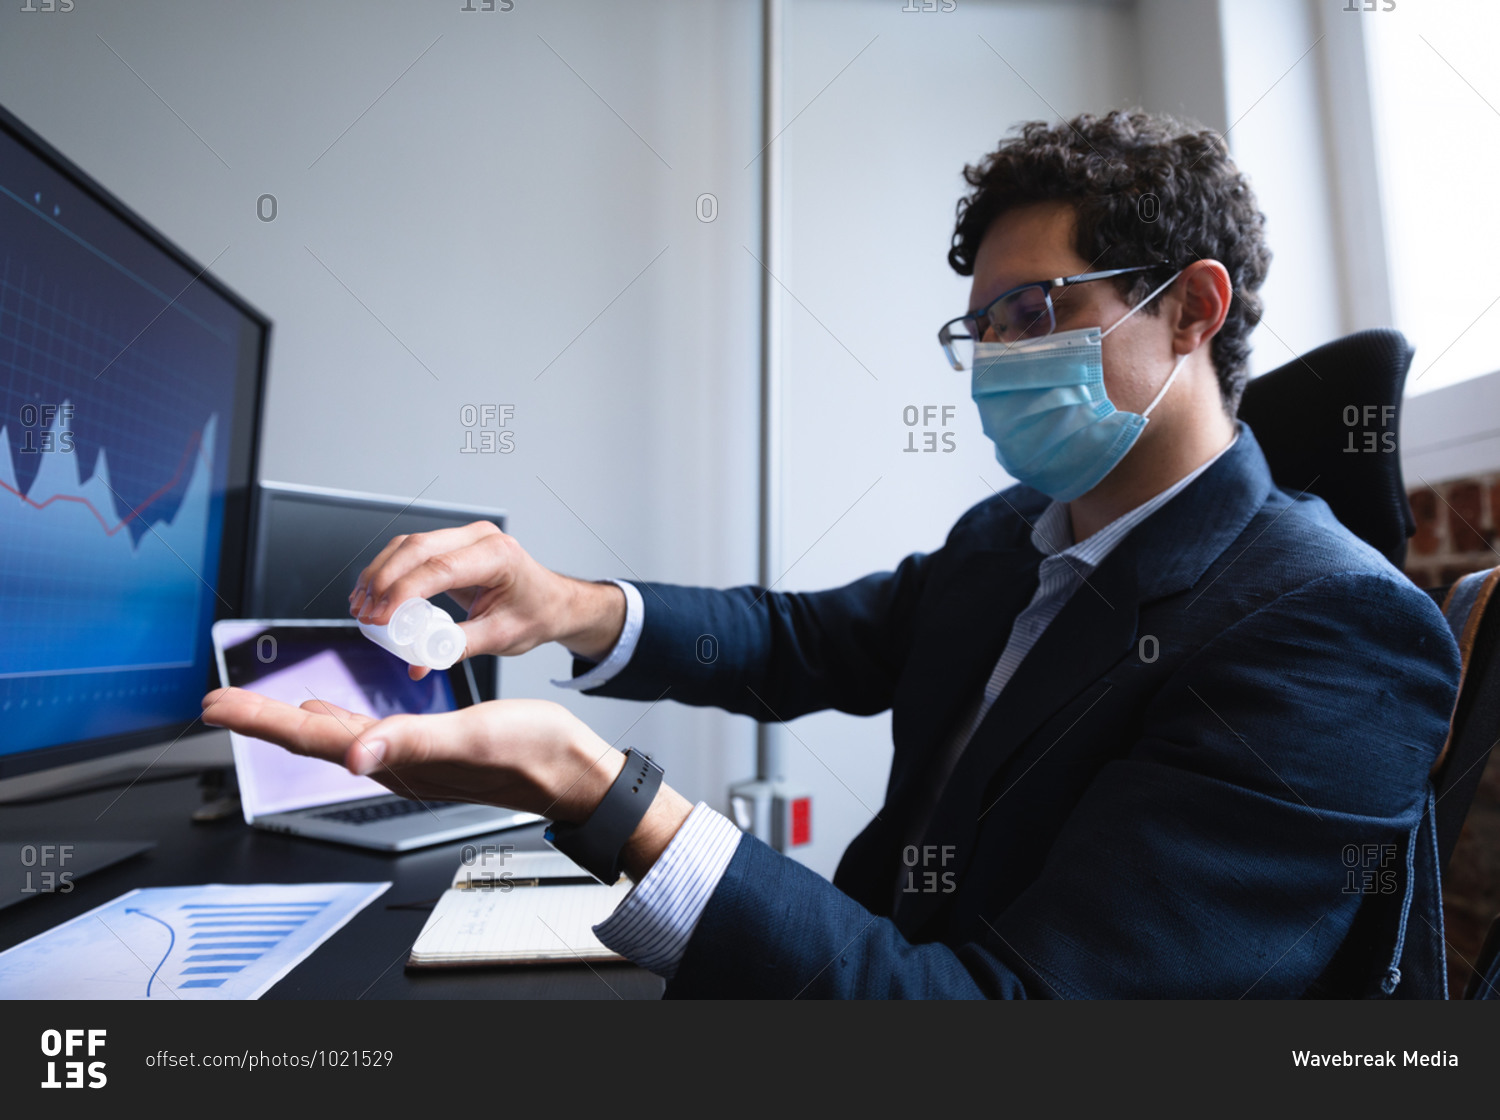 Caucasian man working in a casual office, using sanitizer and wearing face mask. Social distancing in the workplace during Coronavirus Covid 19 pandemic.